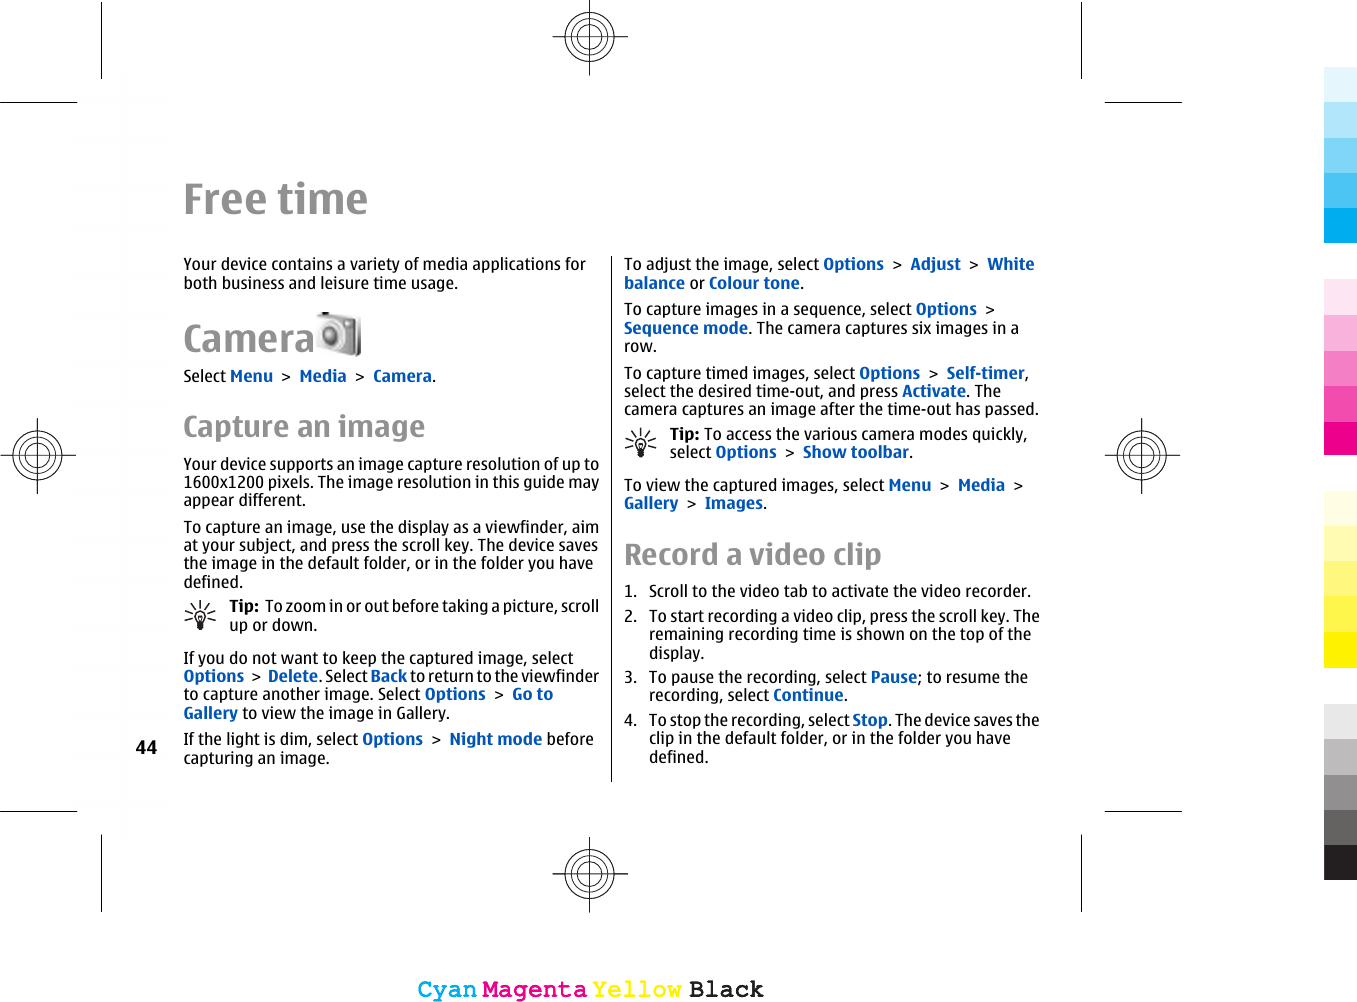 Free timeYour device contains a variety of media applications forboth business and leisure time usage.CameraSelect Menu &gt; Media &gt; Camera.Capture an imageYour device supports an image capture resolution of up to1600x1200 pixels. The image resolution in this guide mayappear different.To capture an image, use the display as a viewfinder, aimat your subject, and press the scroll key. The device savesthe image in the default folder, or in the folder you havedefined.Tip:  To zoom in or out before taking a picture, scrollup or down.If you do not want to keep the captured image, selectOptions &gt; Delete. Select Back to return to the viewfinderto capture another image. Select Options &gt; Go toGallery to view the image in Gallery.If the light is dim, select Options &gt; Night mode beforecapturing an image.To adjust the image, select Options &gt; Adjust &gt; Whitebalance or Colour tone.To capture images in a sequence, select Options &gt;Sequence mode. The camera captures six images in arow.To capture timed images, select Options &gt; Self-timer,select the desired time-out, and press Activate. Thecamera captures an image after the time-out has passed.Tip: To access the various camera modes quickly,select Options &gt; Show toolbar.To view the captured images, select Menu &gt; Media &gt;Gallery &gt; Images.Record a video clip1. Scroll to the video tab to activate the video recorder.2. To start recording a video clip, press the scroll key. Theremaining recording time is shown on the top of thedisplay.3. To pause the recording, select Pause; to resume therecording, select Continue.4. To stop the recording, select Stop. The device saves theclip in the default folder, or in the folder you havedefined.44CyanCyanMagentaMagentaYellowYellowBlackBlackCyanCyanMagentaMagentaYellowYellowBlackBlack